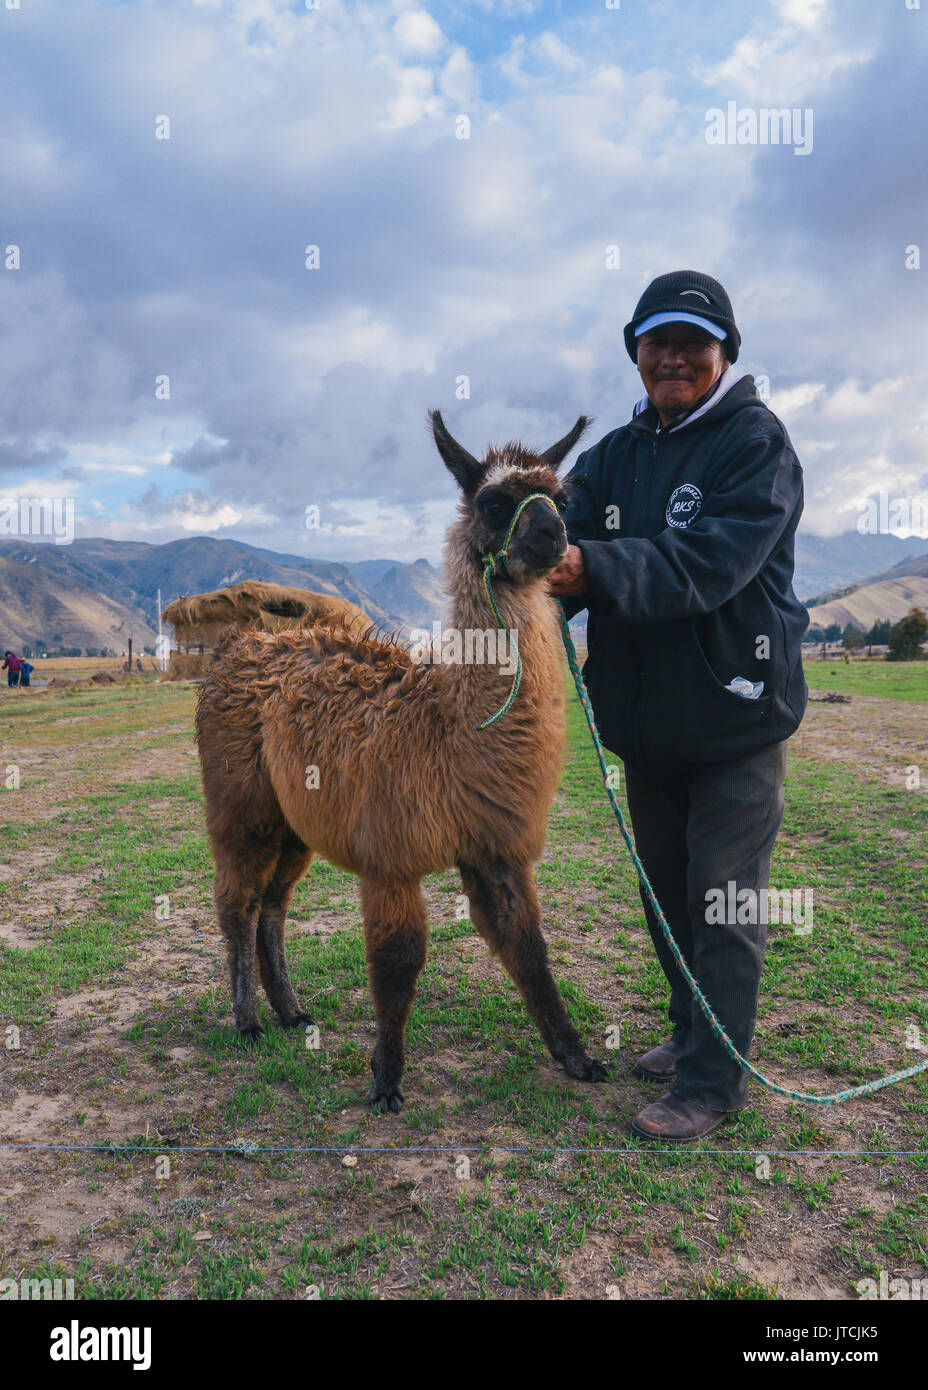 A man handling a llama, an animal traditional to the high altitudes of the Andes in South America Stock Photo